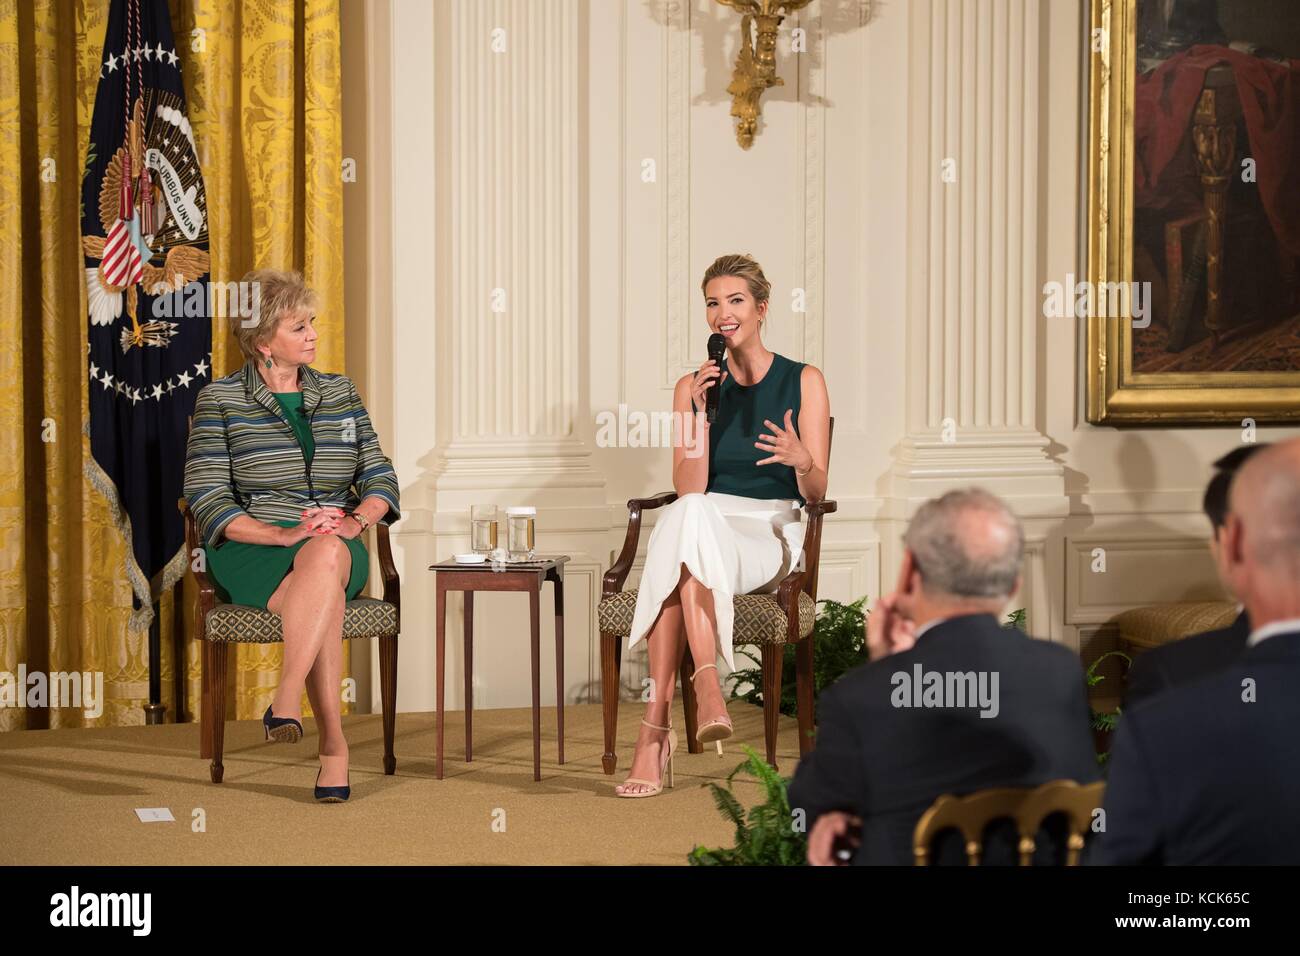 Small Business Administration Administrator Linda McMahon (left) and U.S. First Daughter Ivanka Trump answer questions during The Engine of the American Dream small business owners event at the White House East Room August 1, 2017 in Washington, DC.  (photo by Andrea Hanks via Planetpix) Stock Photo